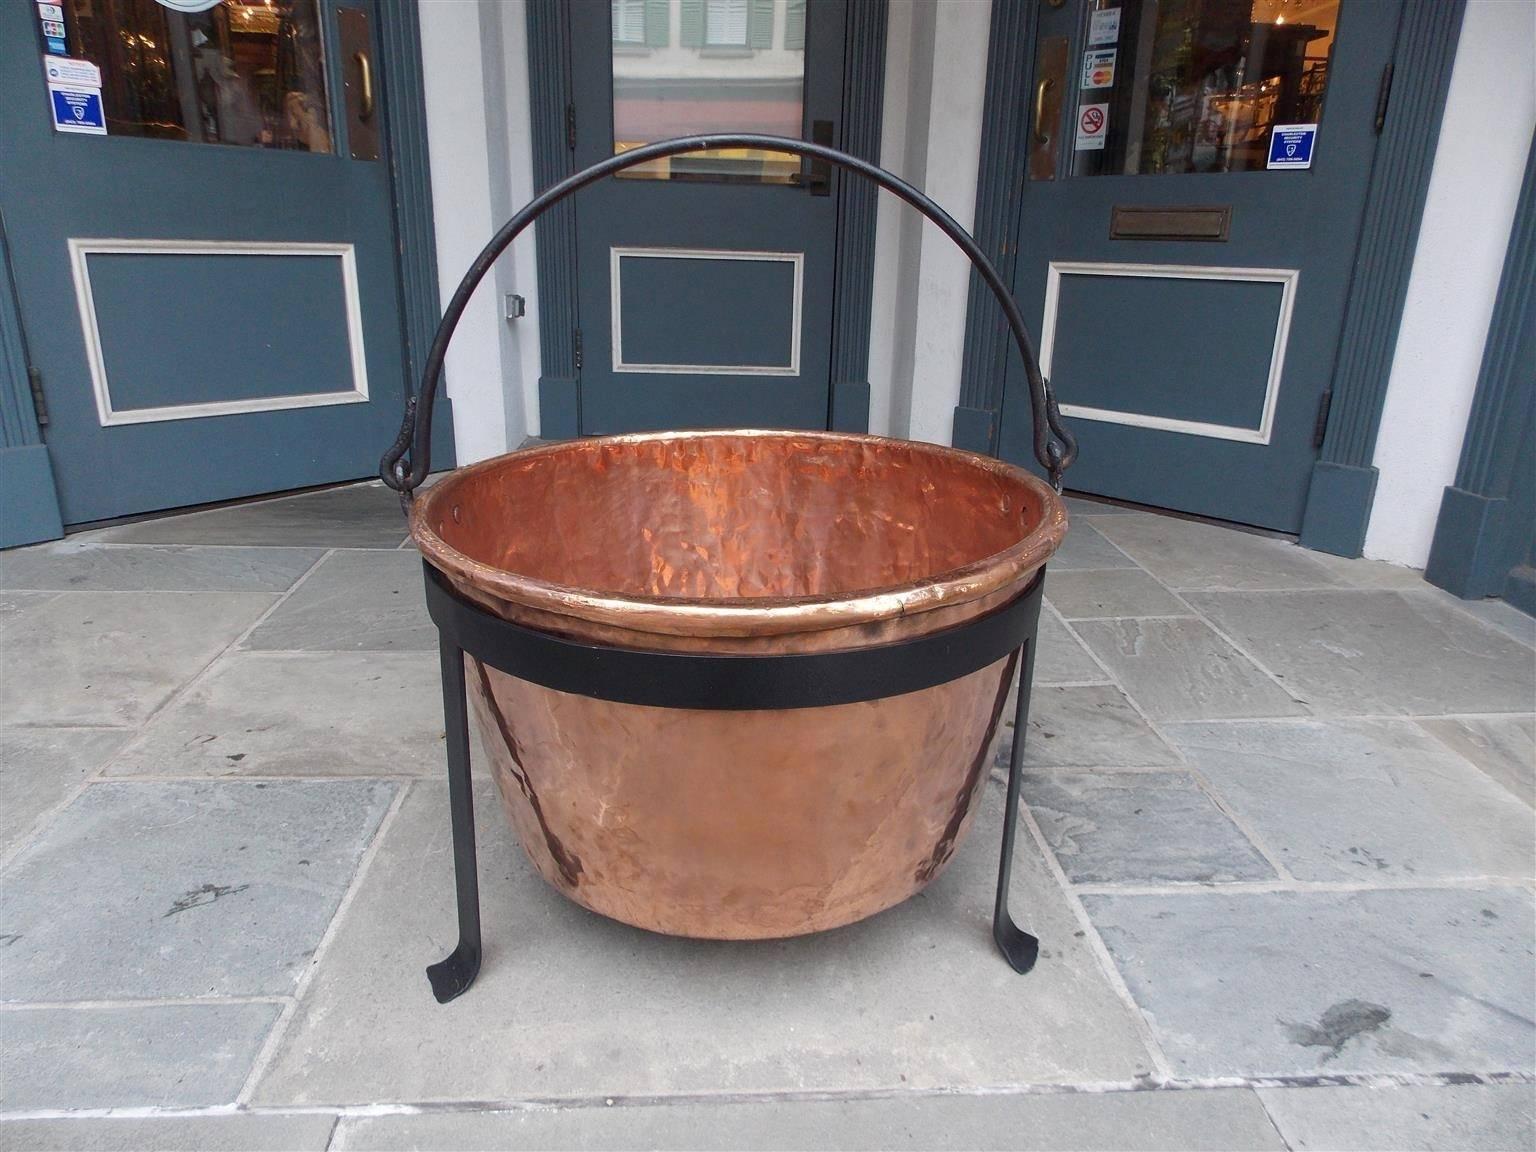 Hand-Crafted American Copper and Wrought Iron Apple Butter Pot on Stand, Circa 1780